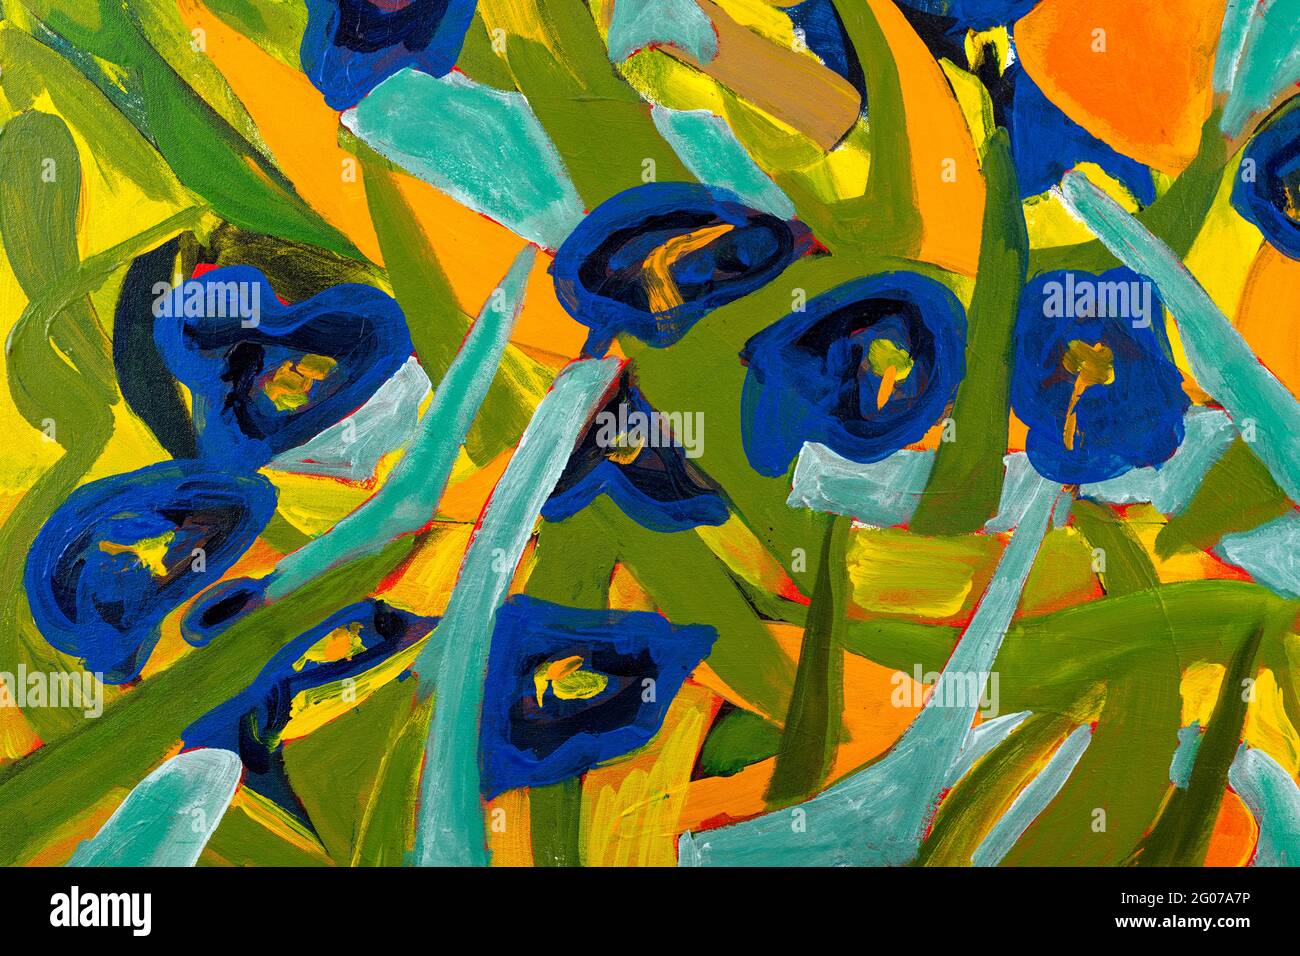 Abstract painting fragment with vibrant colors, strong shapes and brushstrokes textures. Artistic unique painting. Stock Photo